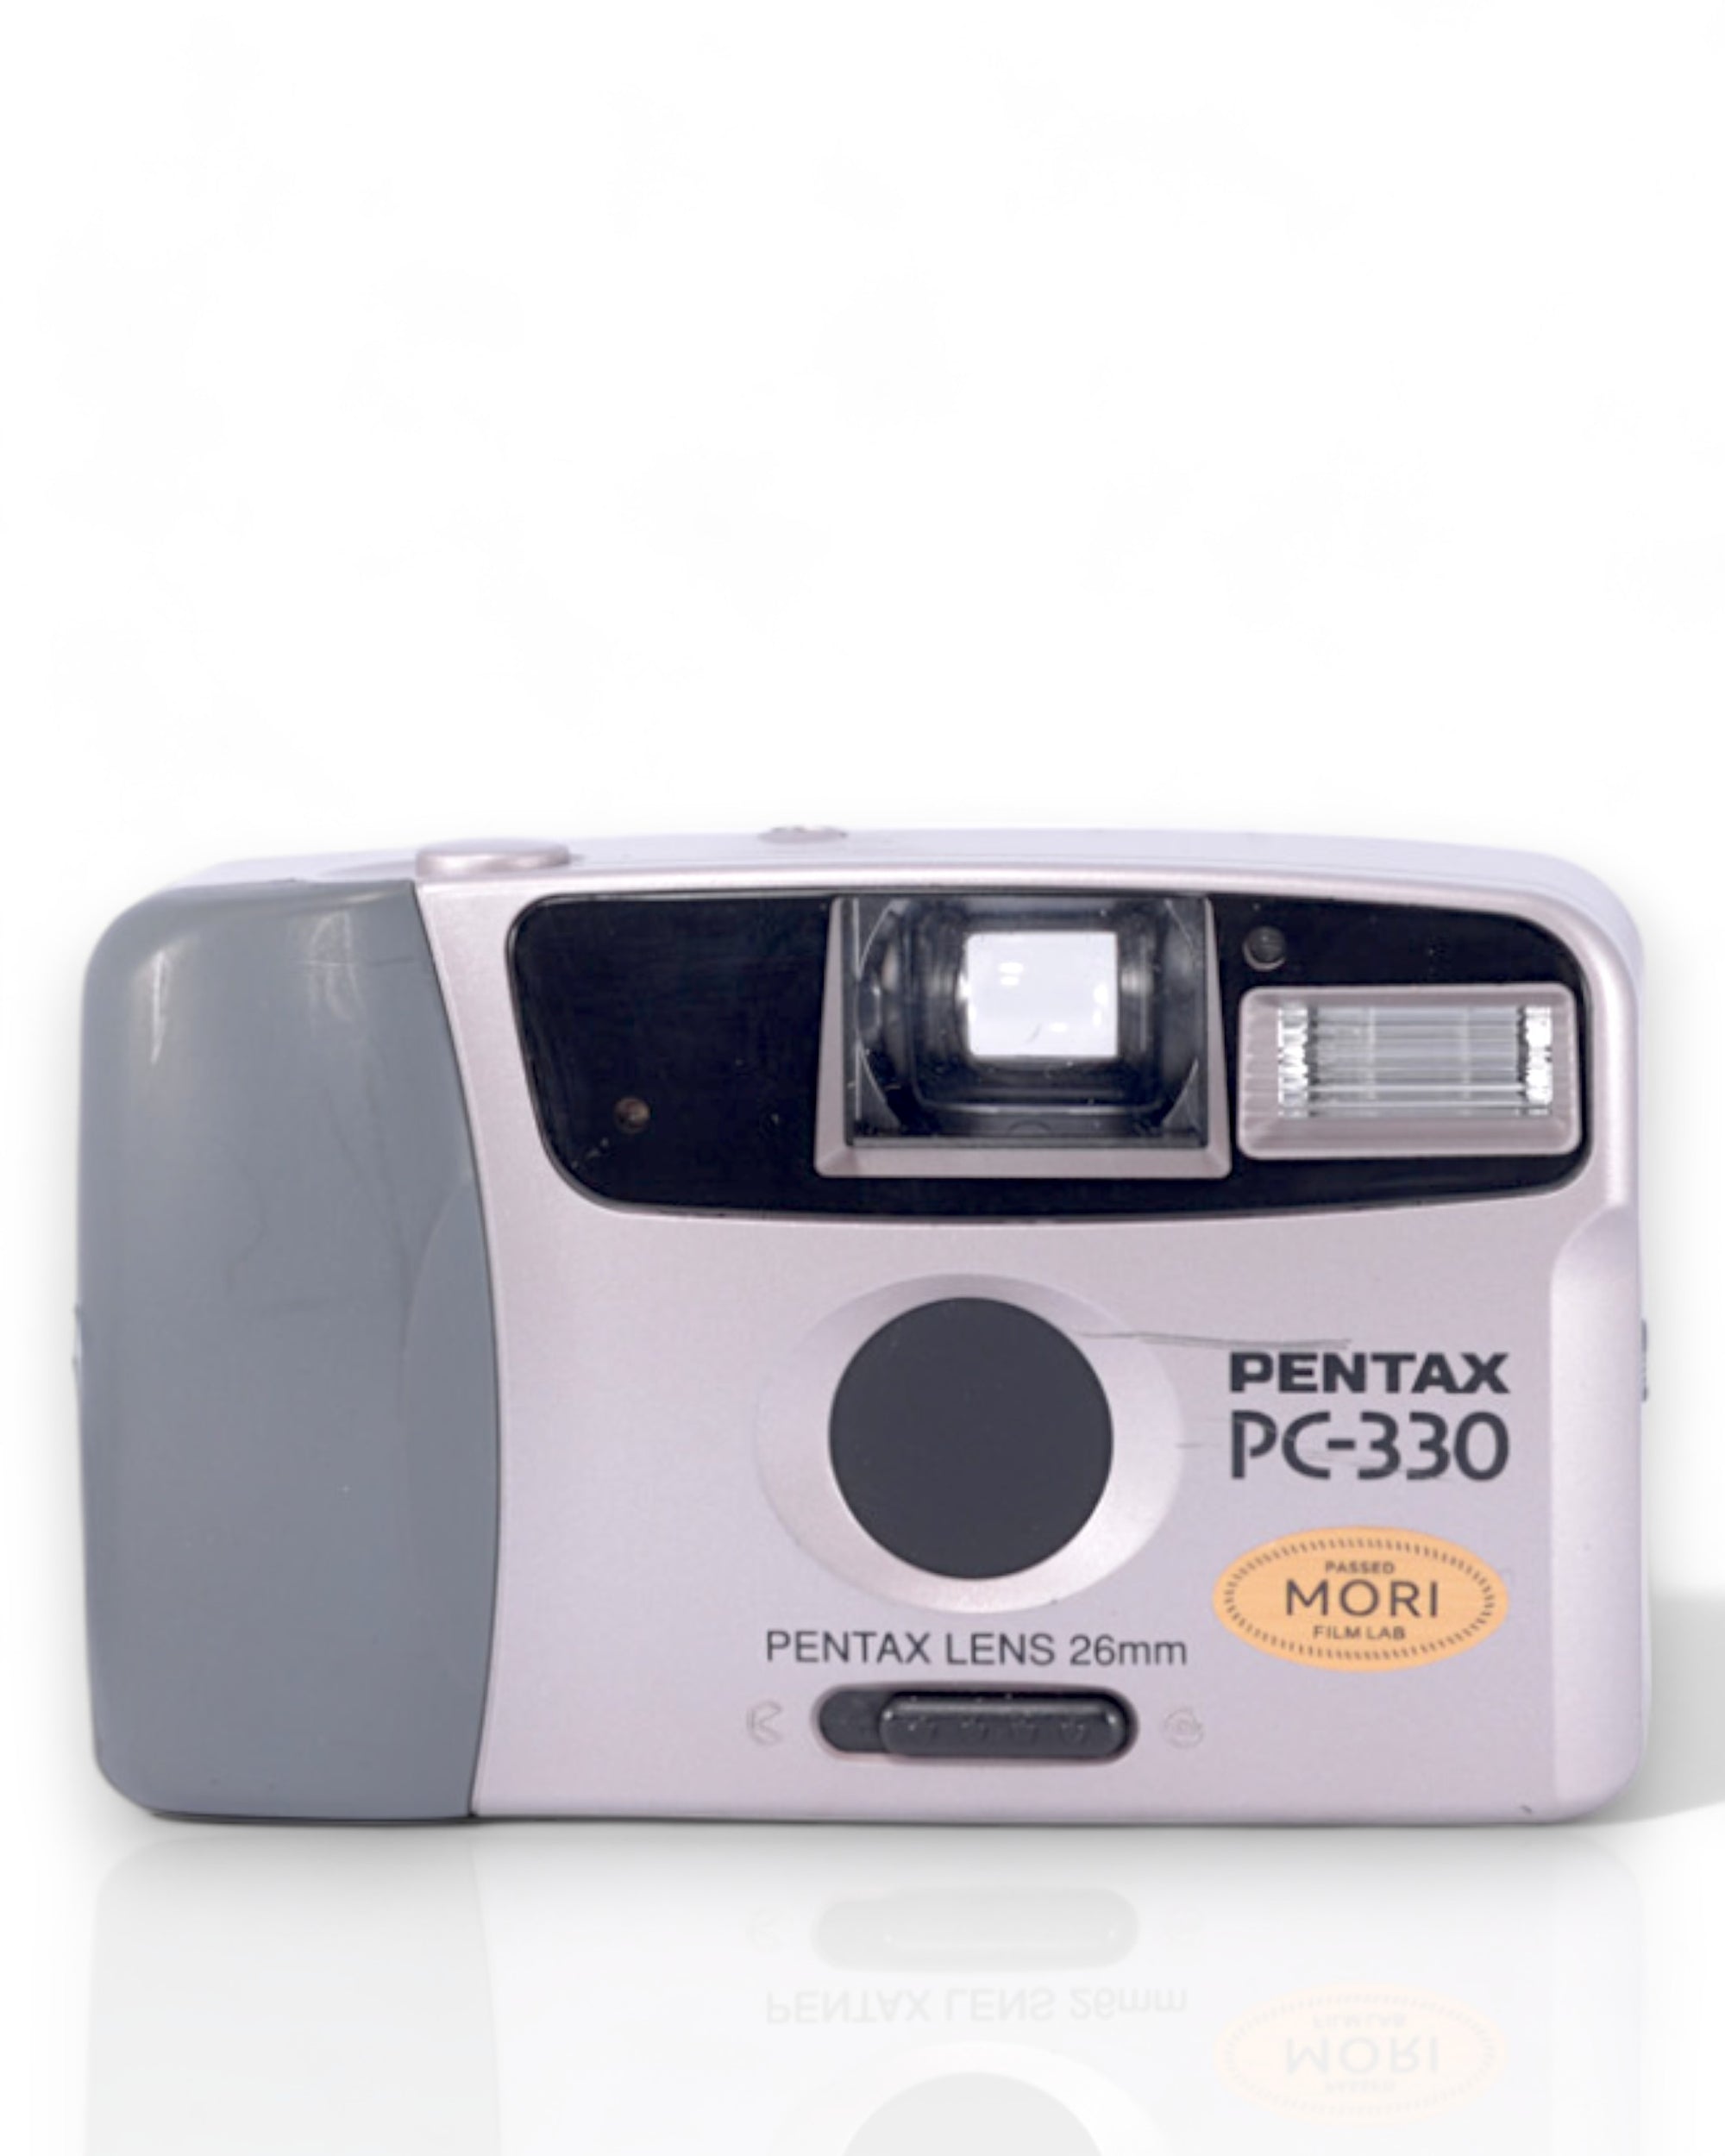 Pentax PC-330 35mm Point & Shoot Film Camera with 26mm Lens